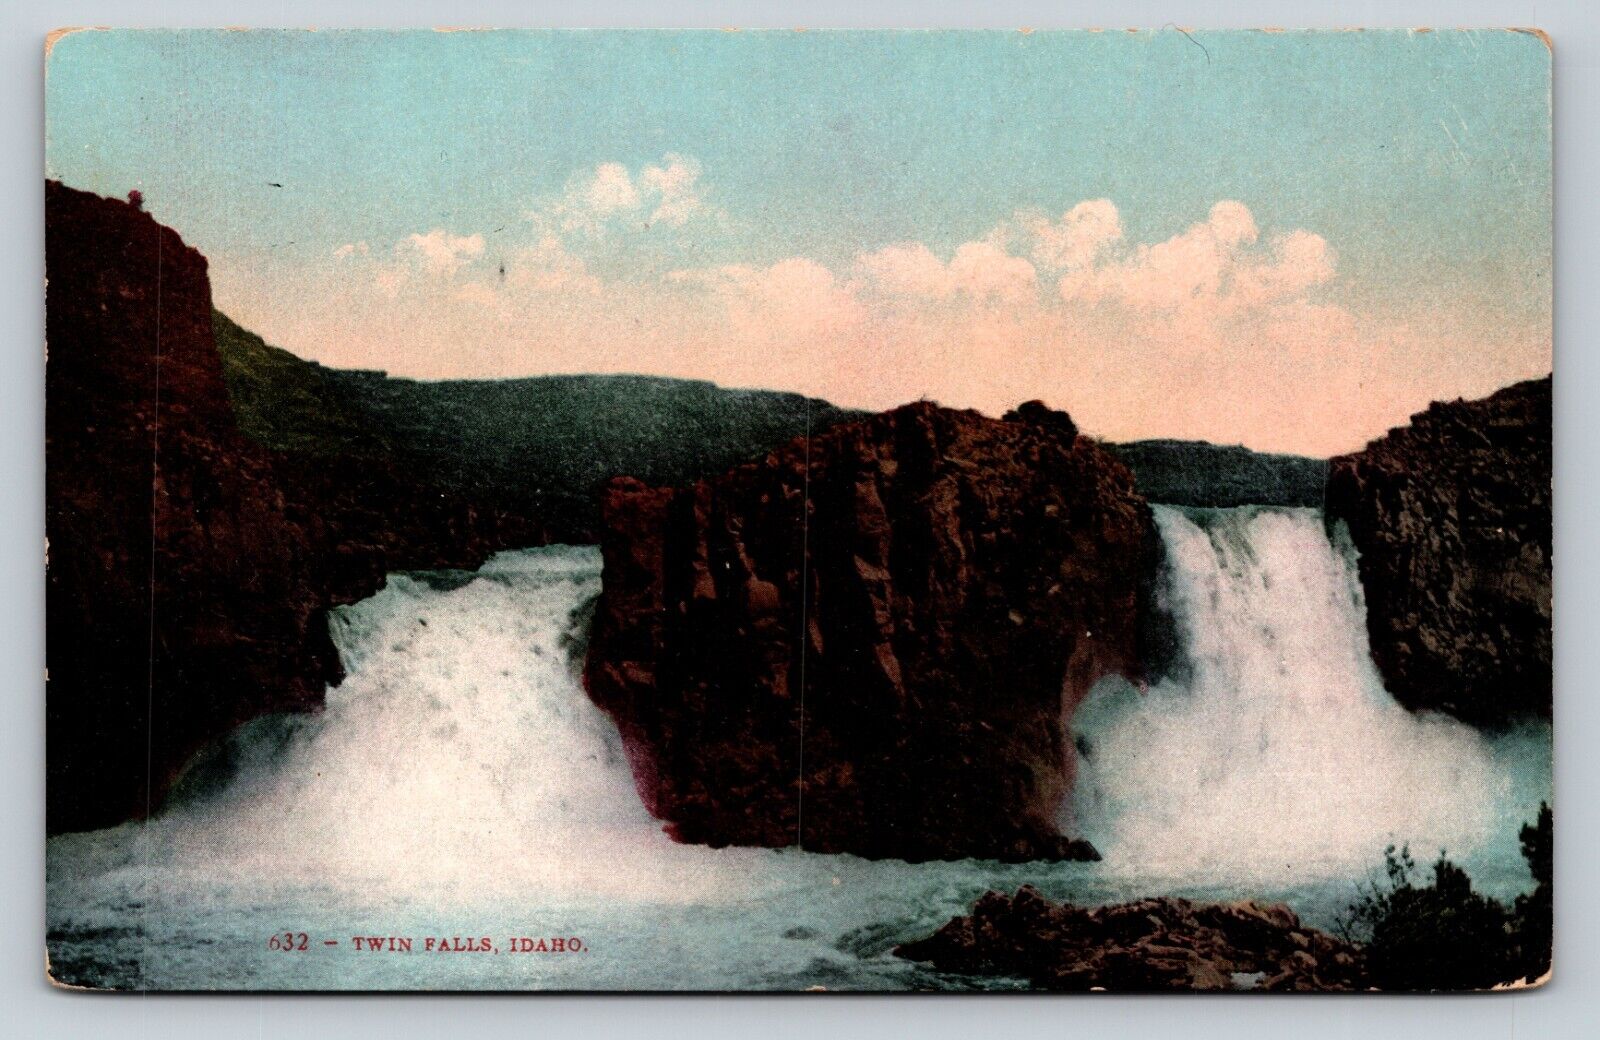 Twin Falls Idaho ID Scenic View Of Two Waterfalls, Snake River ANTIQUE Postcard